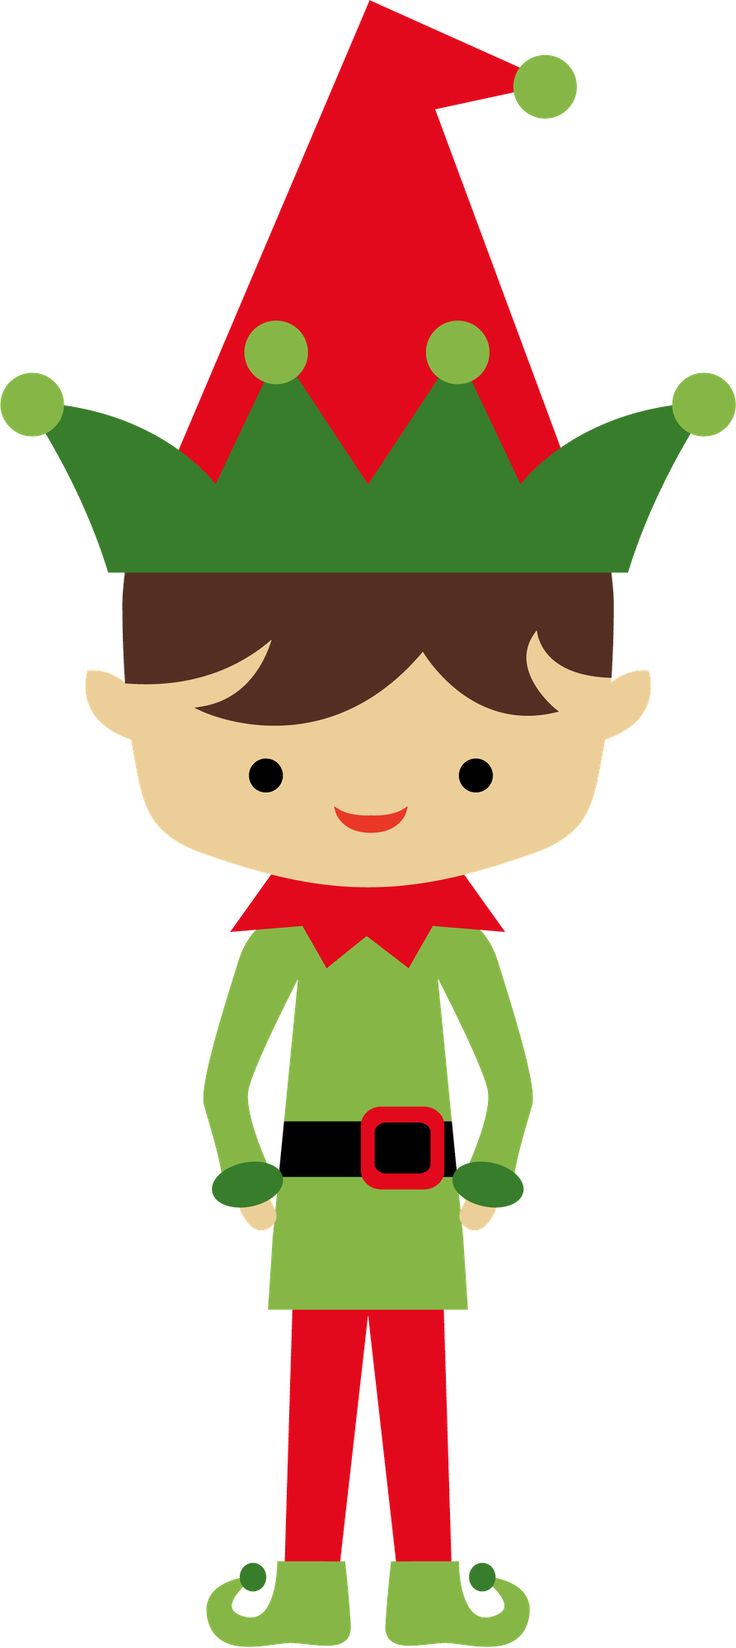 clipart images of elves - photo #3